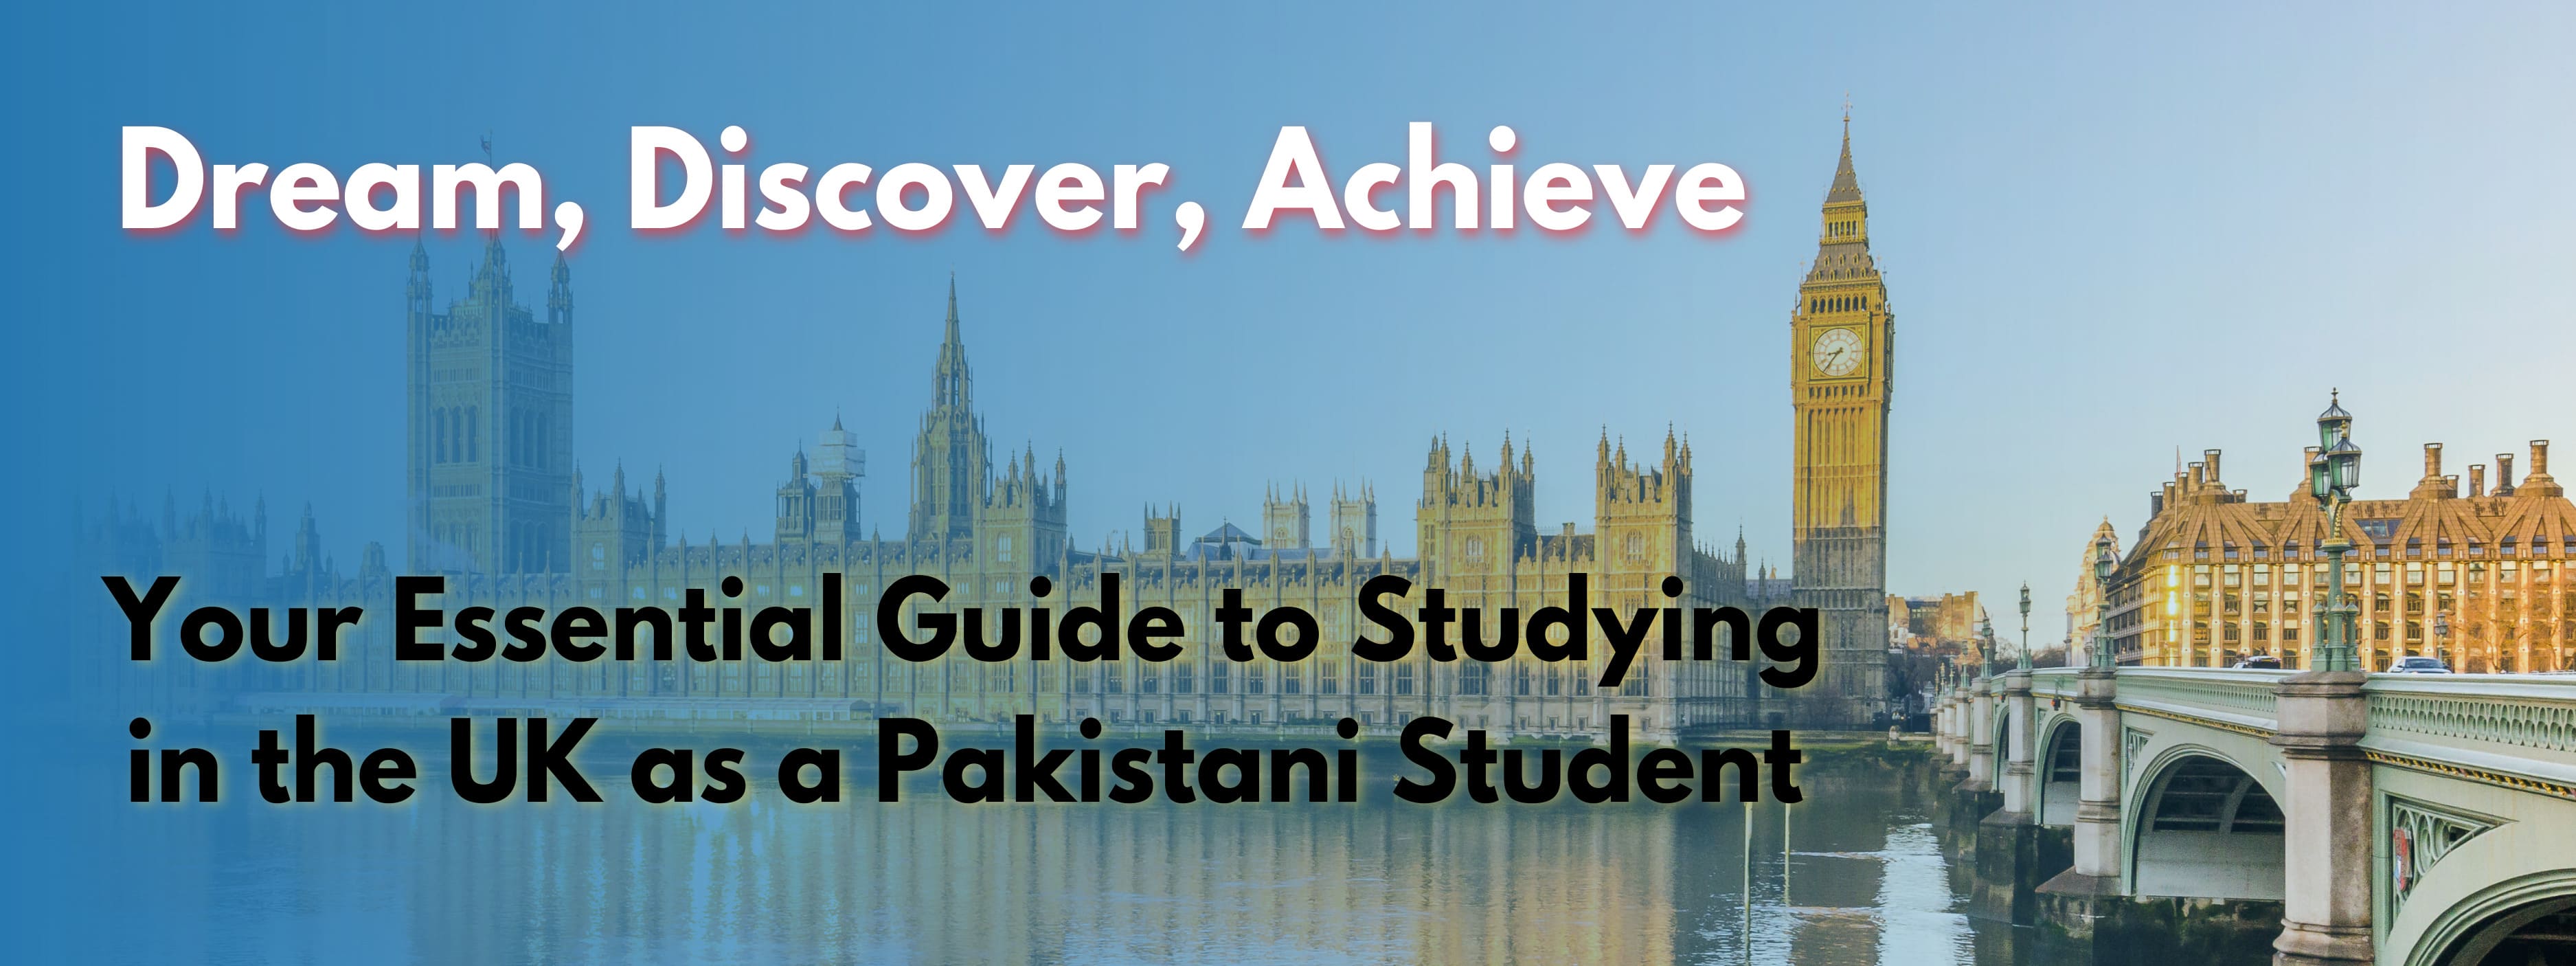 Dream, Discover, Achieve: Your Essential Guide to Studying in the UK as a Pakistani Student